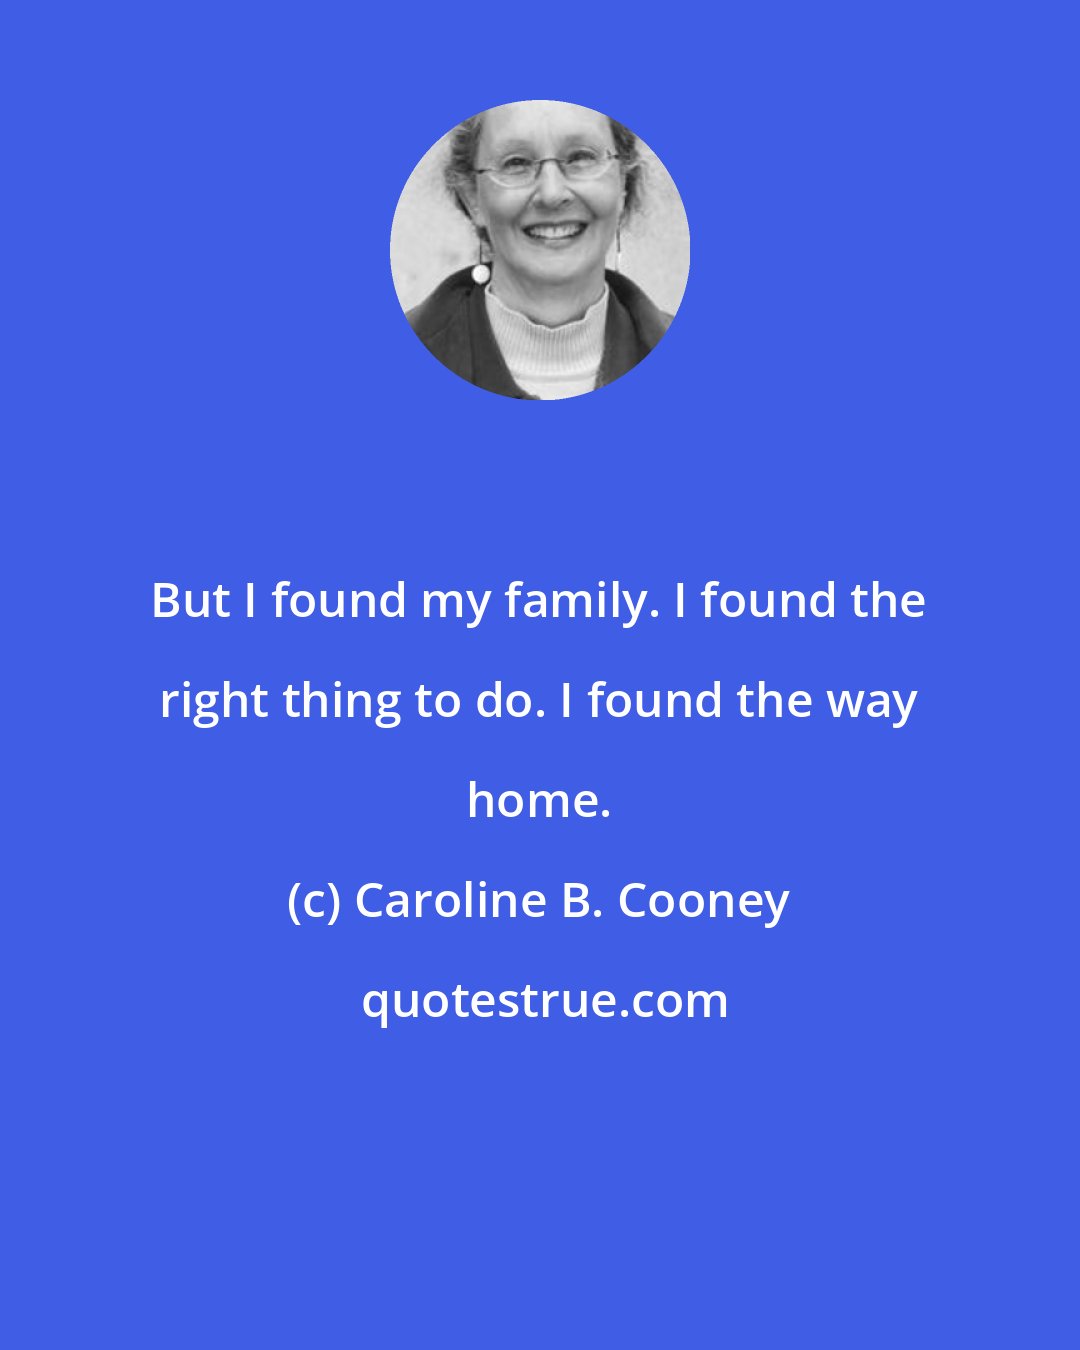 Caroline B. Cooney: But I found my family. I found the right thing to do. I found the way home.